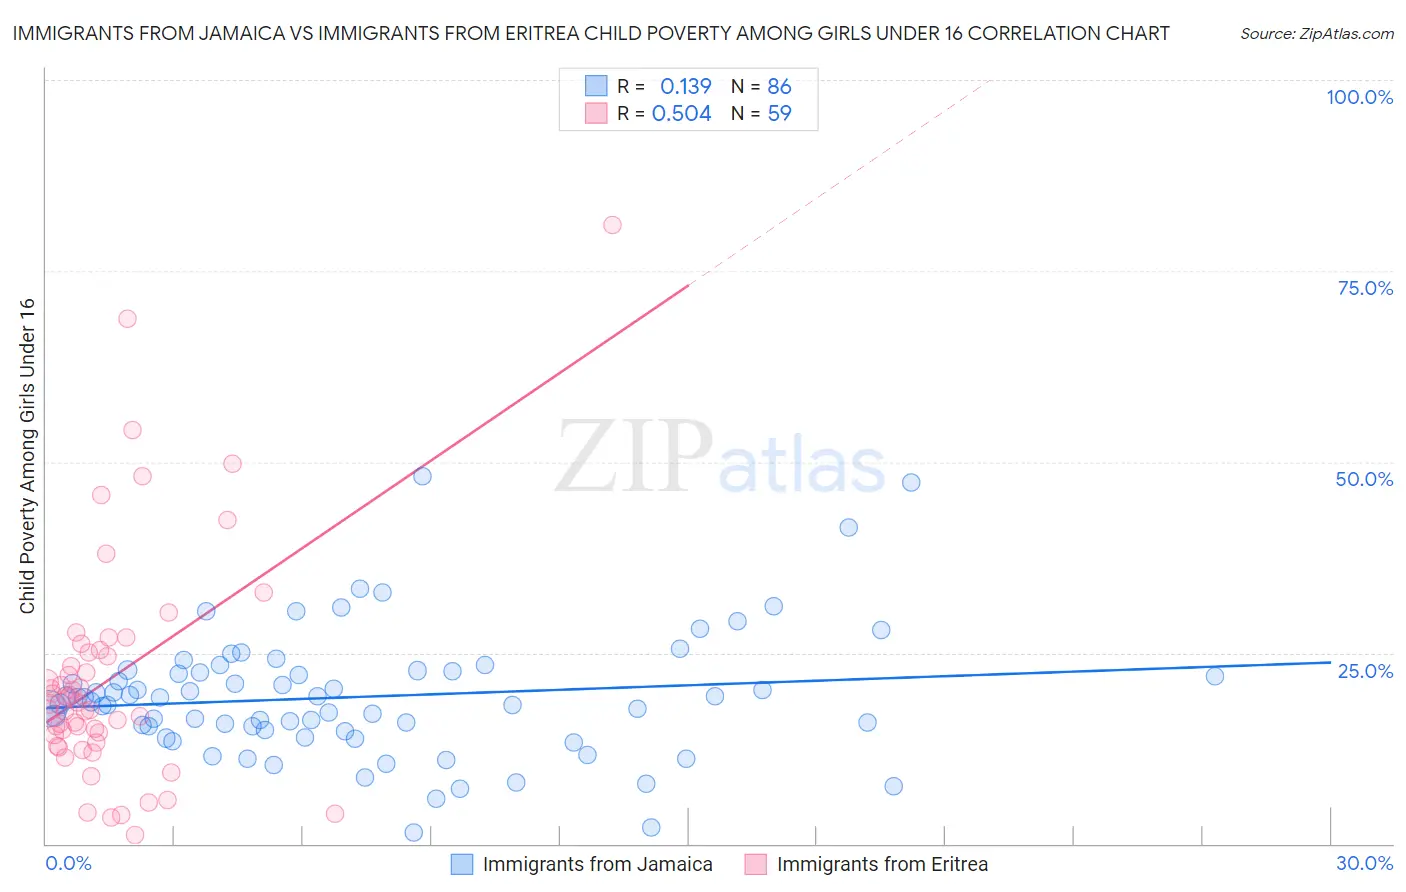 Immigrants from Jamaica vs Immigrants from Eritrea Child Poverty Among Girls Under 16